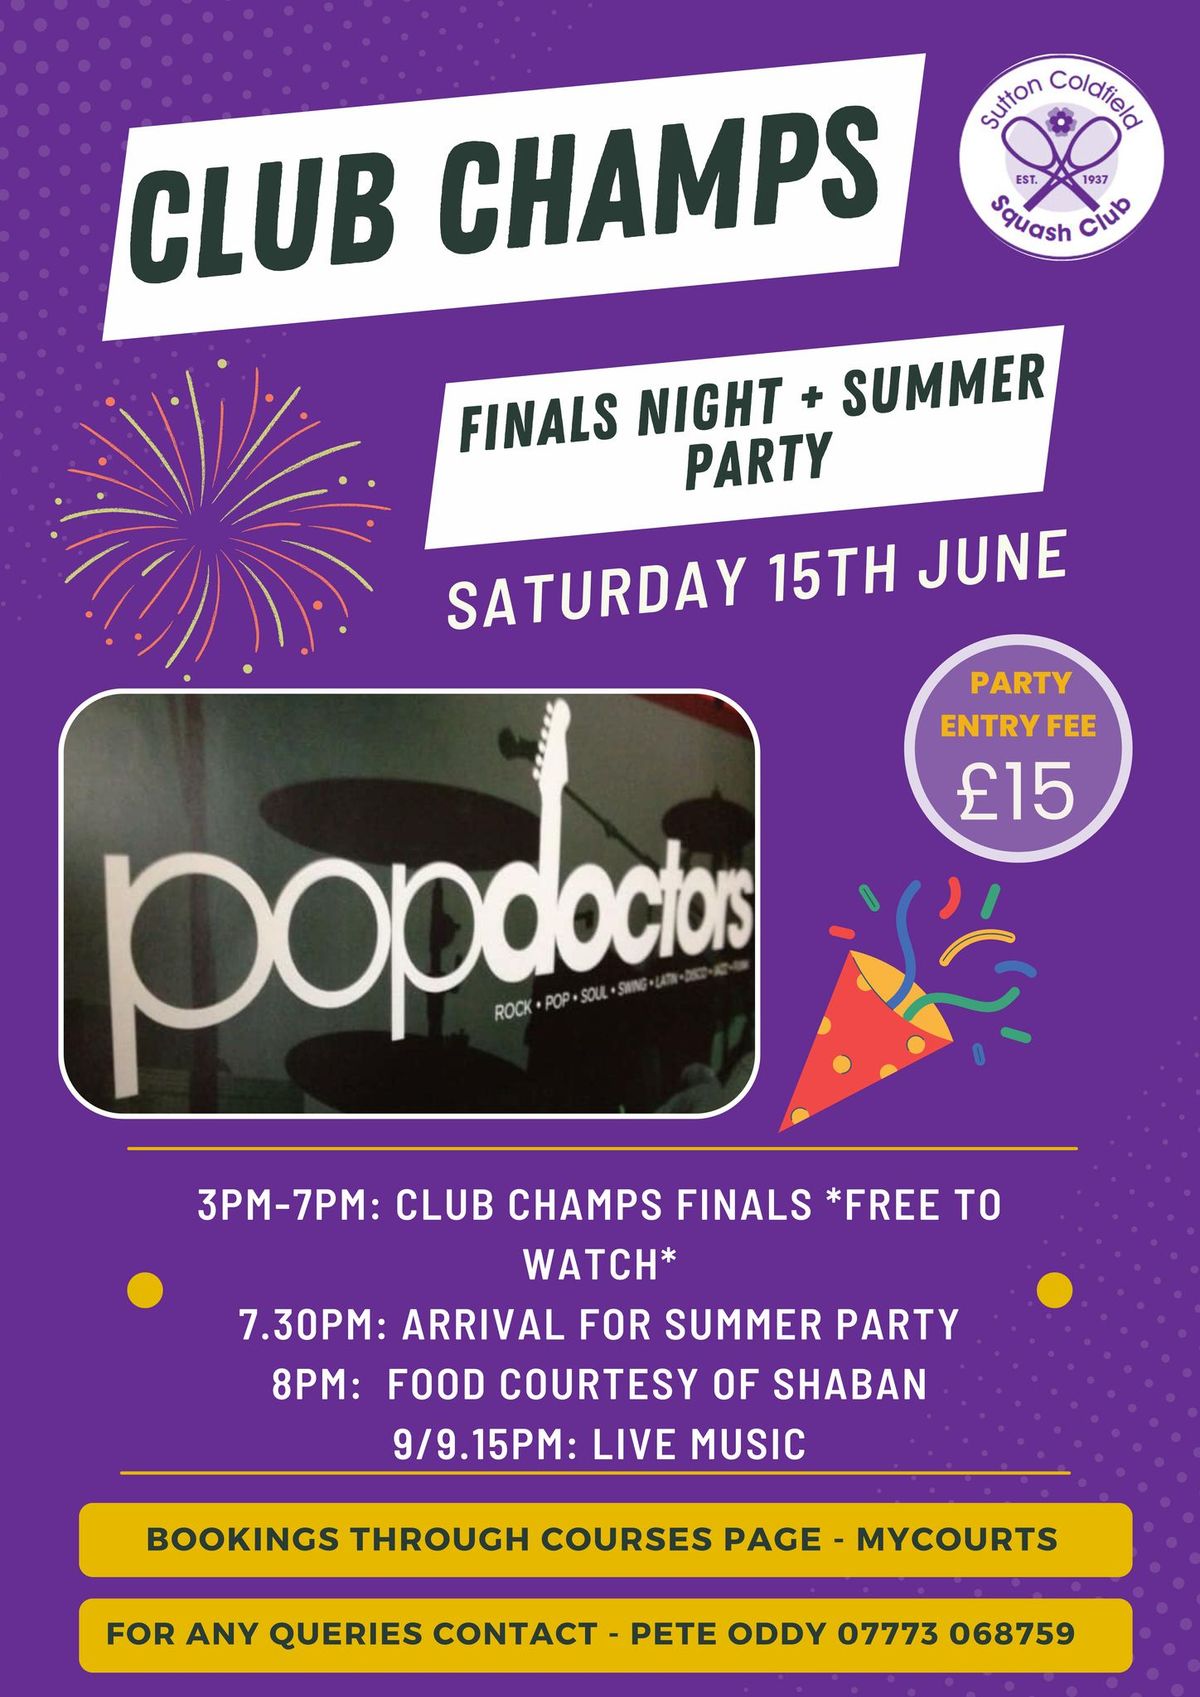 Club Championships Finals Night - Summer Party